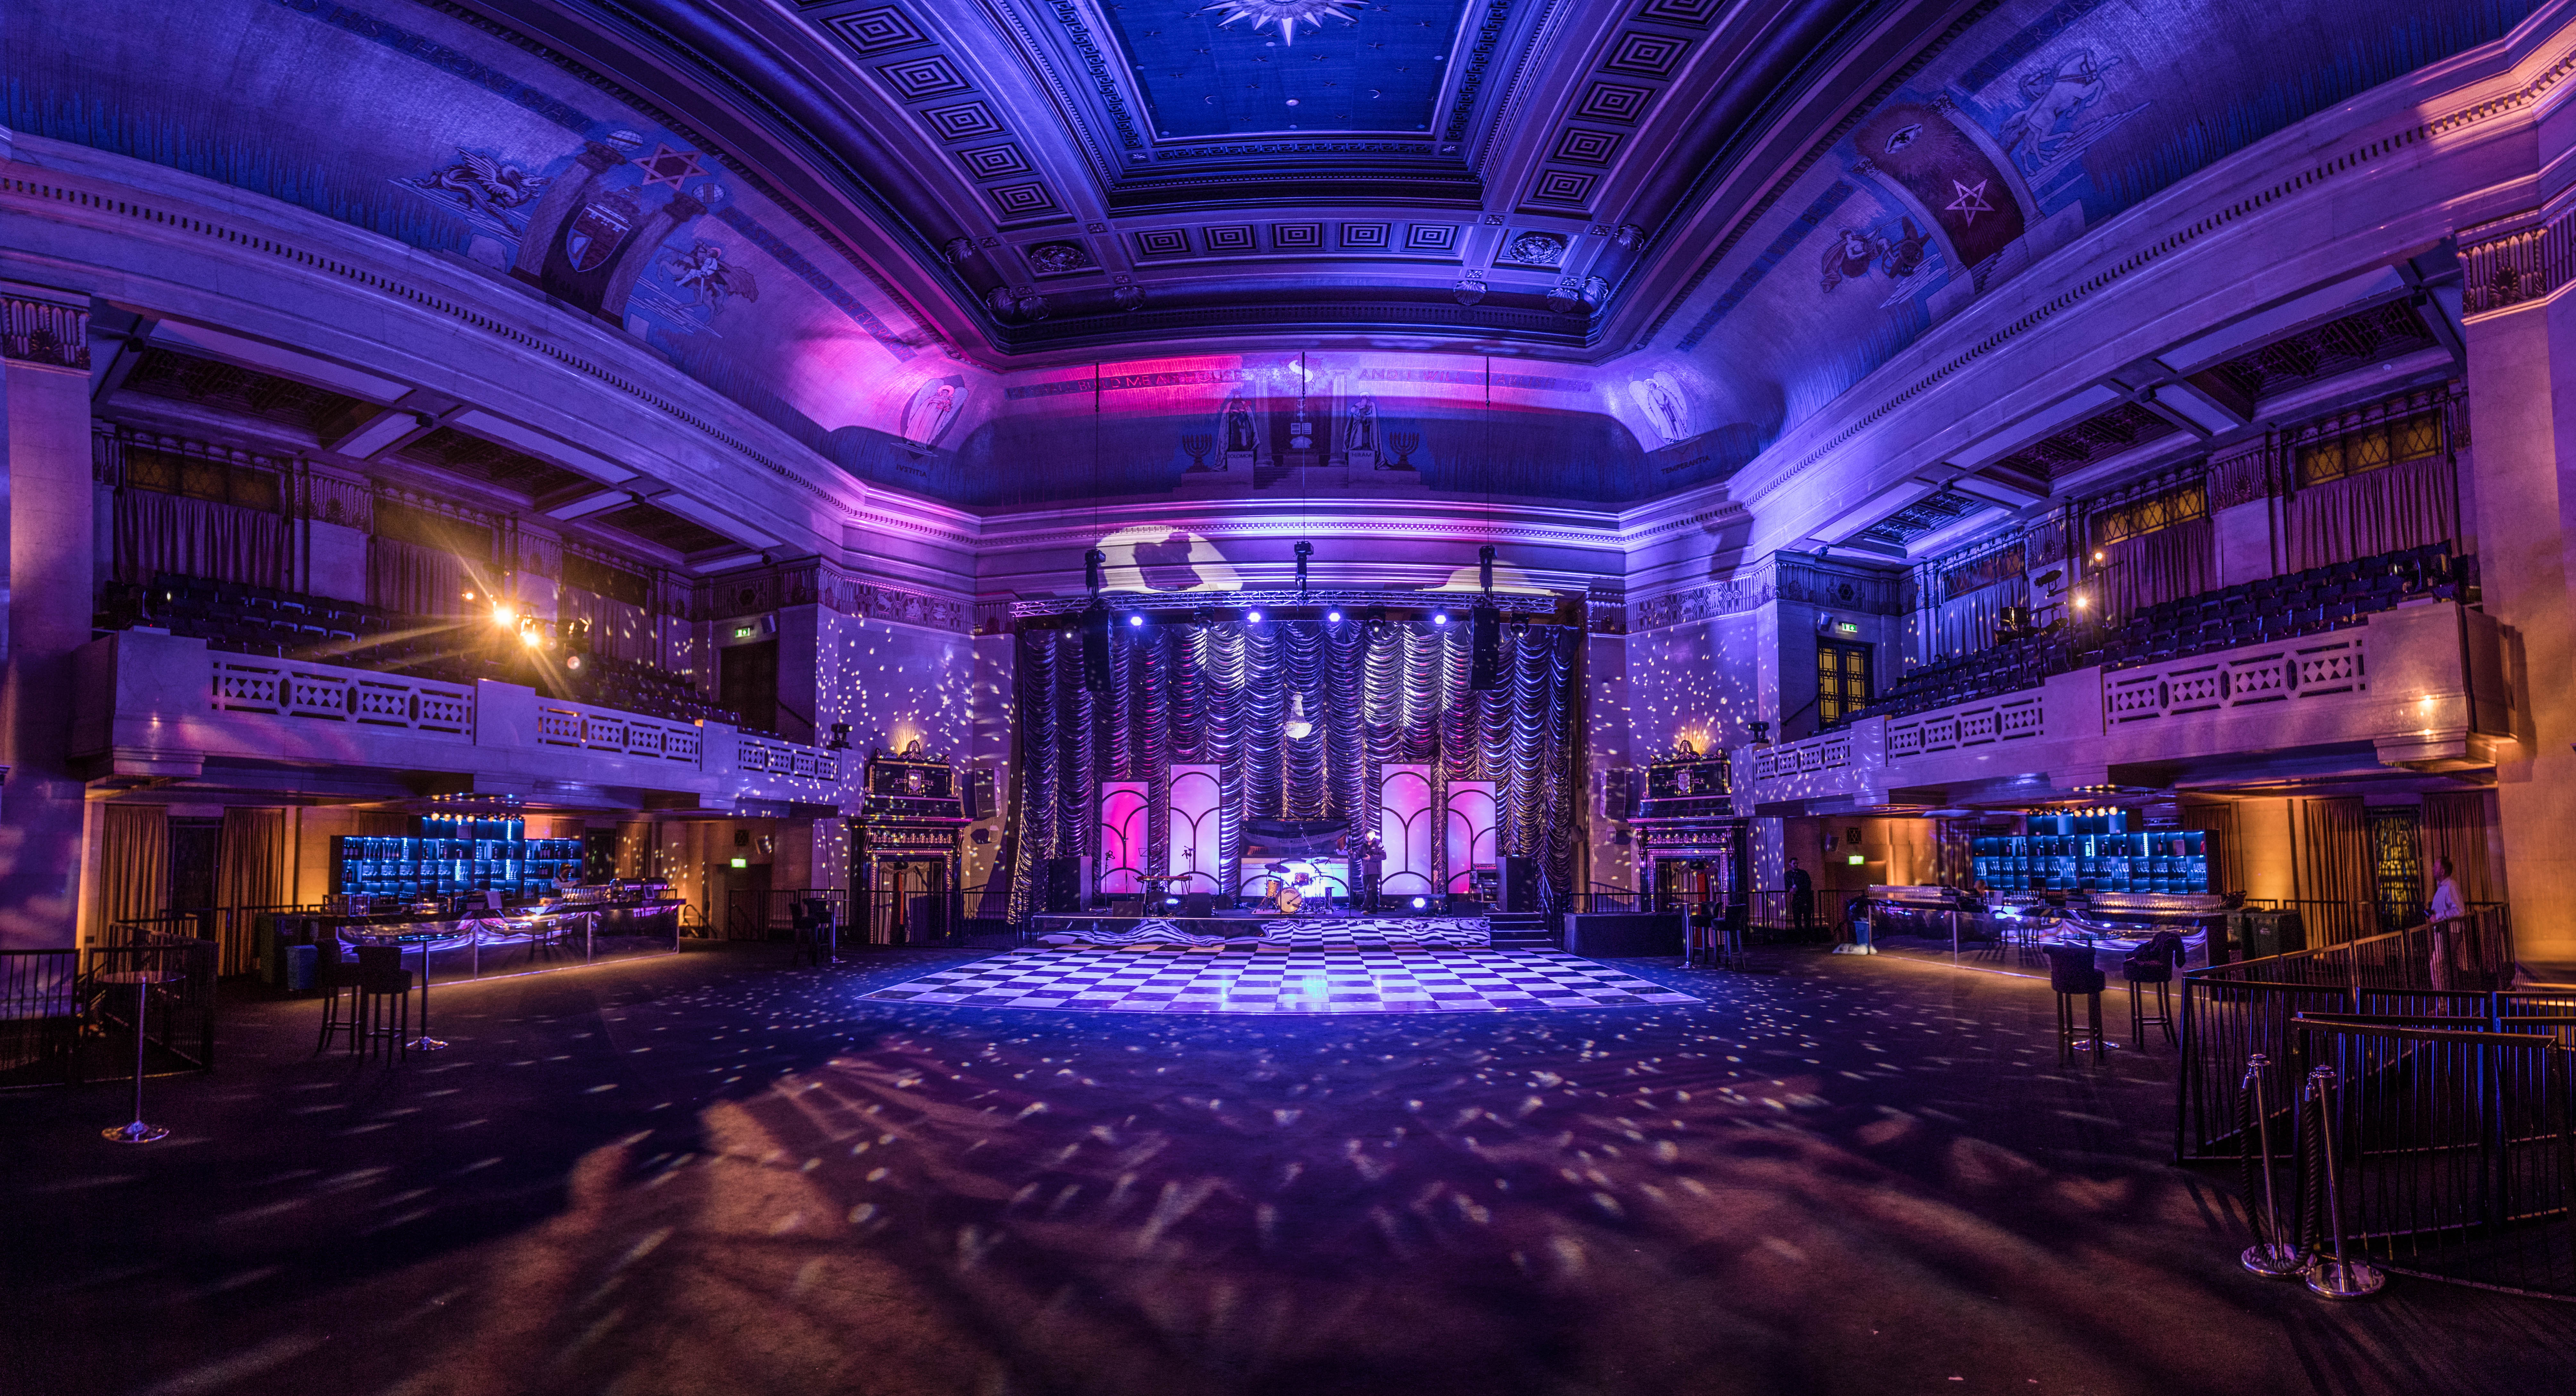 The Grand Temple At Freemasons Temple Venue Hire For Events | Images ...